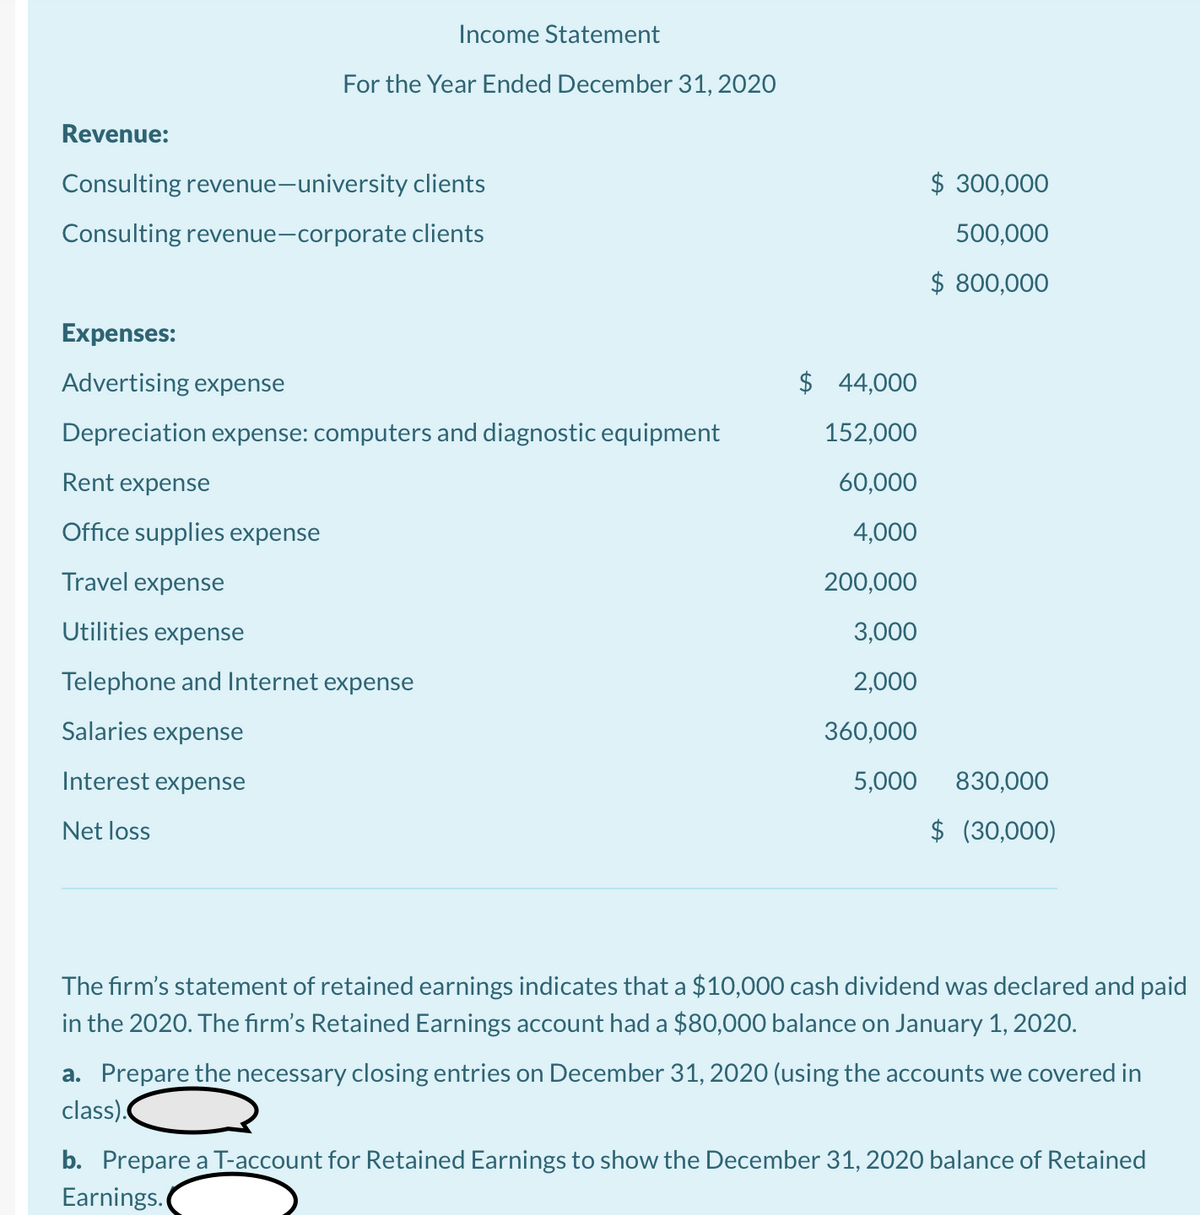 Income Statement
For the Year Ended December 31, 2020
Revenue:
Consulting revenue-university clients
$ 300,000
Consulting revenue-corporate clients
500,000
$ 800,000
Expenses:
Advertising expense
$ 44,000
Depreciation expense: computers and diagnostic equipment
152,000
Rent expense
60,000
Office supplies expense
4,000
Travel expense
200,000
Utilities expense
3,000
Telephone and Internet expense
2,000
Salaries expense
360,000
Interest expense
5,000
830,000
Net loss
$ (30,000)
The firm's statement of retained earnings indicates that a $10,000 cash dividend was declared and paid
in the 2020. The firm's Retained Earnings account had a $80,000 balance on January 1, 2020.
a. Prepare the necessary closing entries on December 31, 202O (using the accounts we covered in
class).
b. Prepare a T-account for Retained Earnings to show the December 31, 2020 balance of Retained
Earnings.
